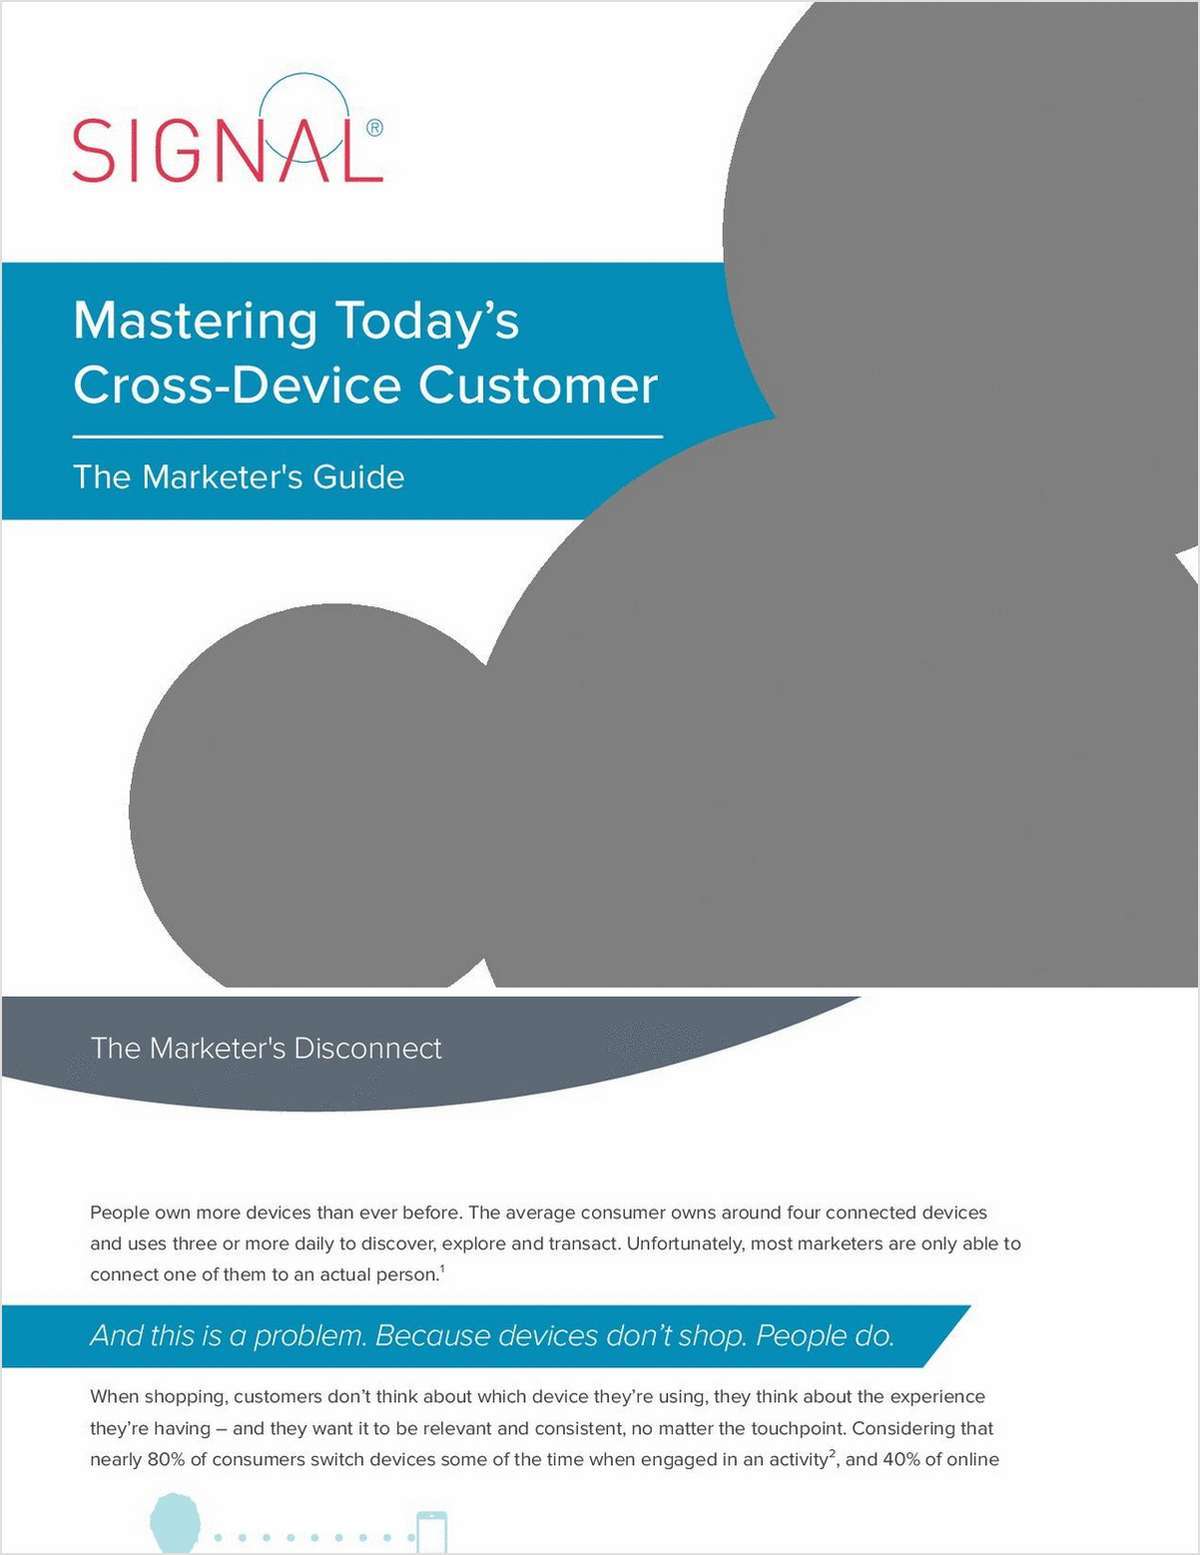 4 Rules For Developing Your Brand's Cross-Device Strategy